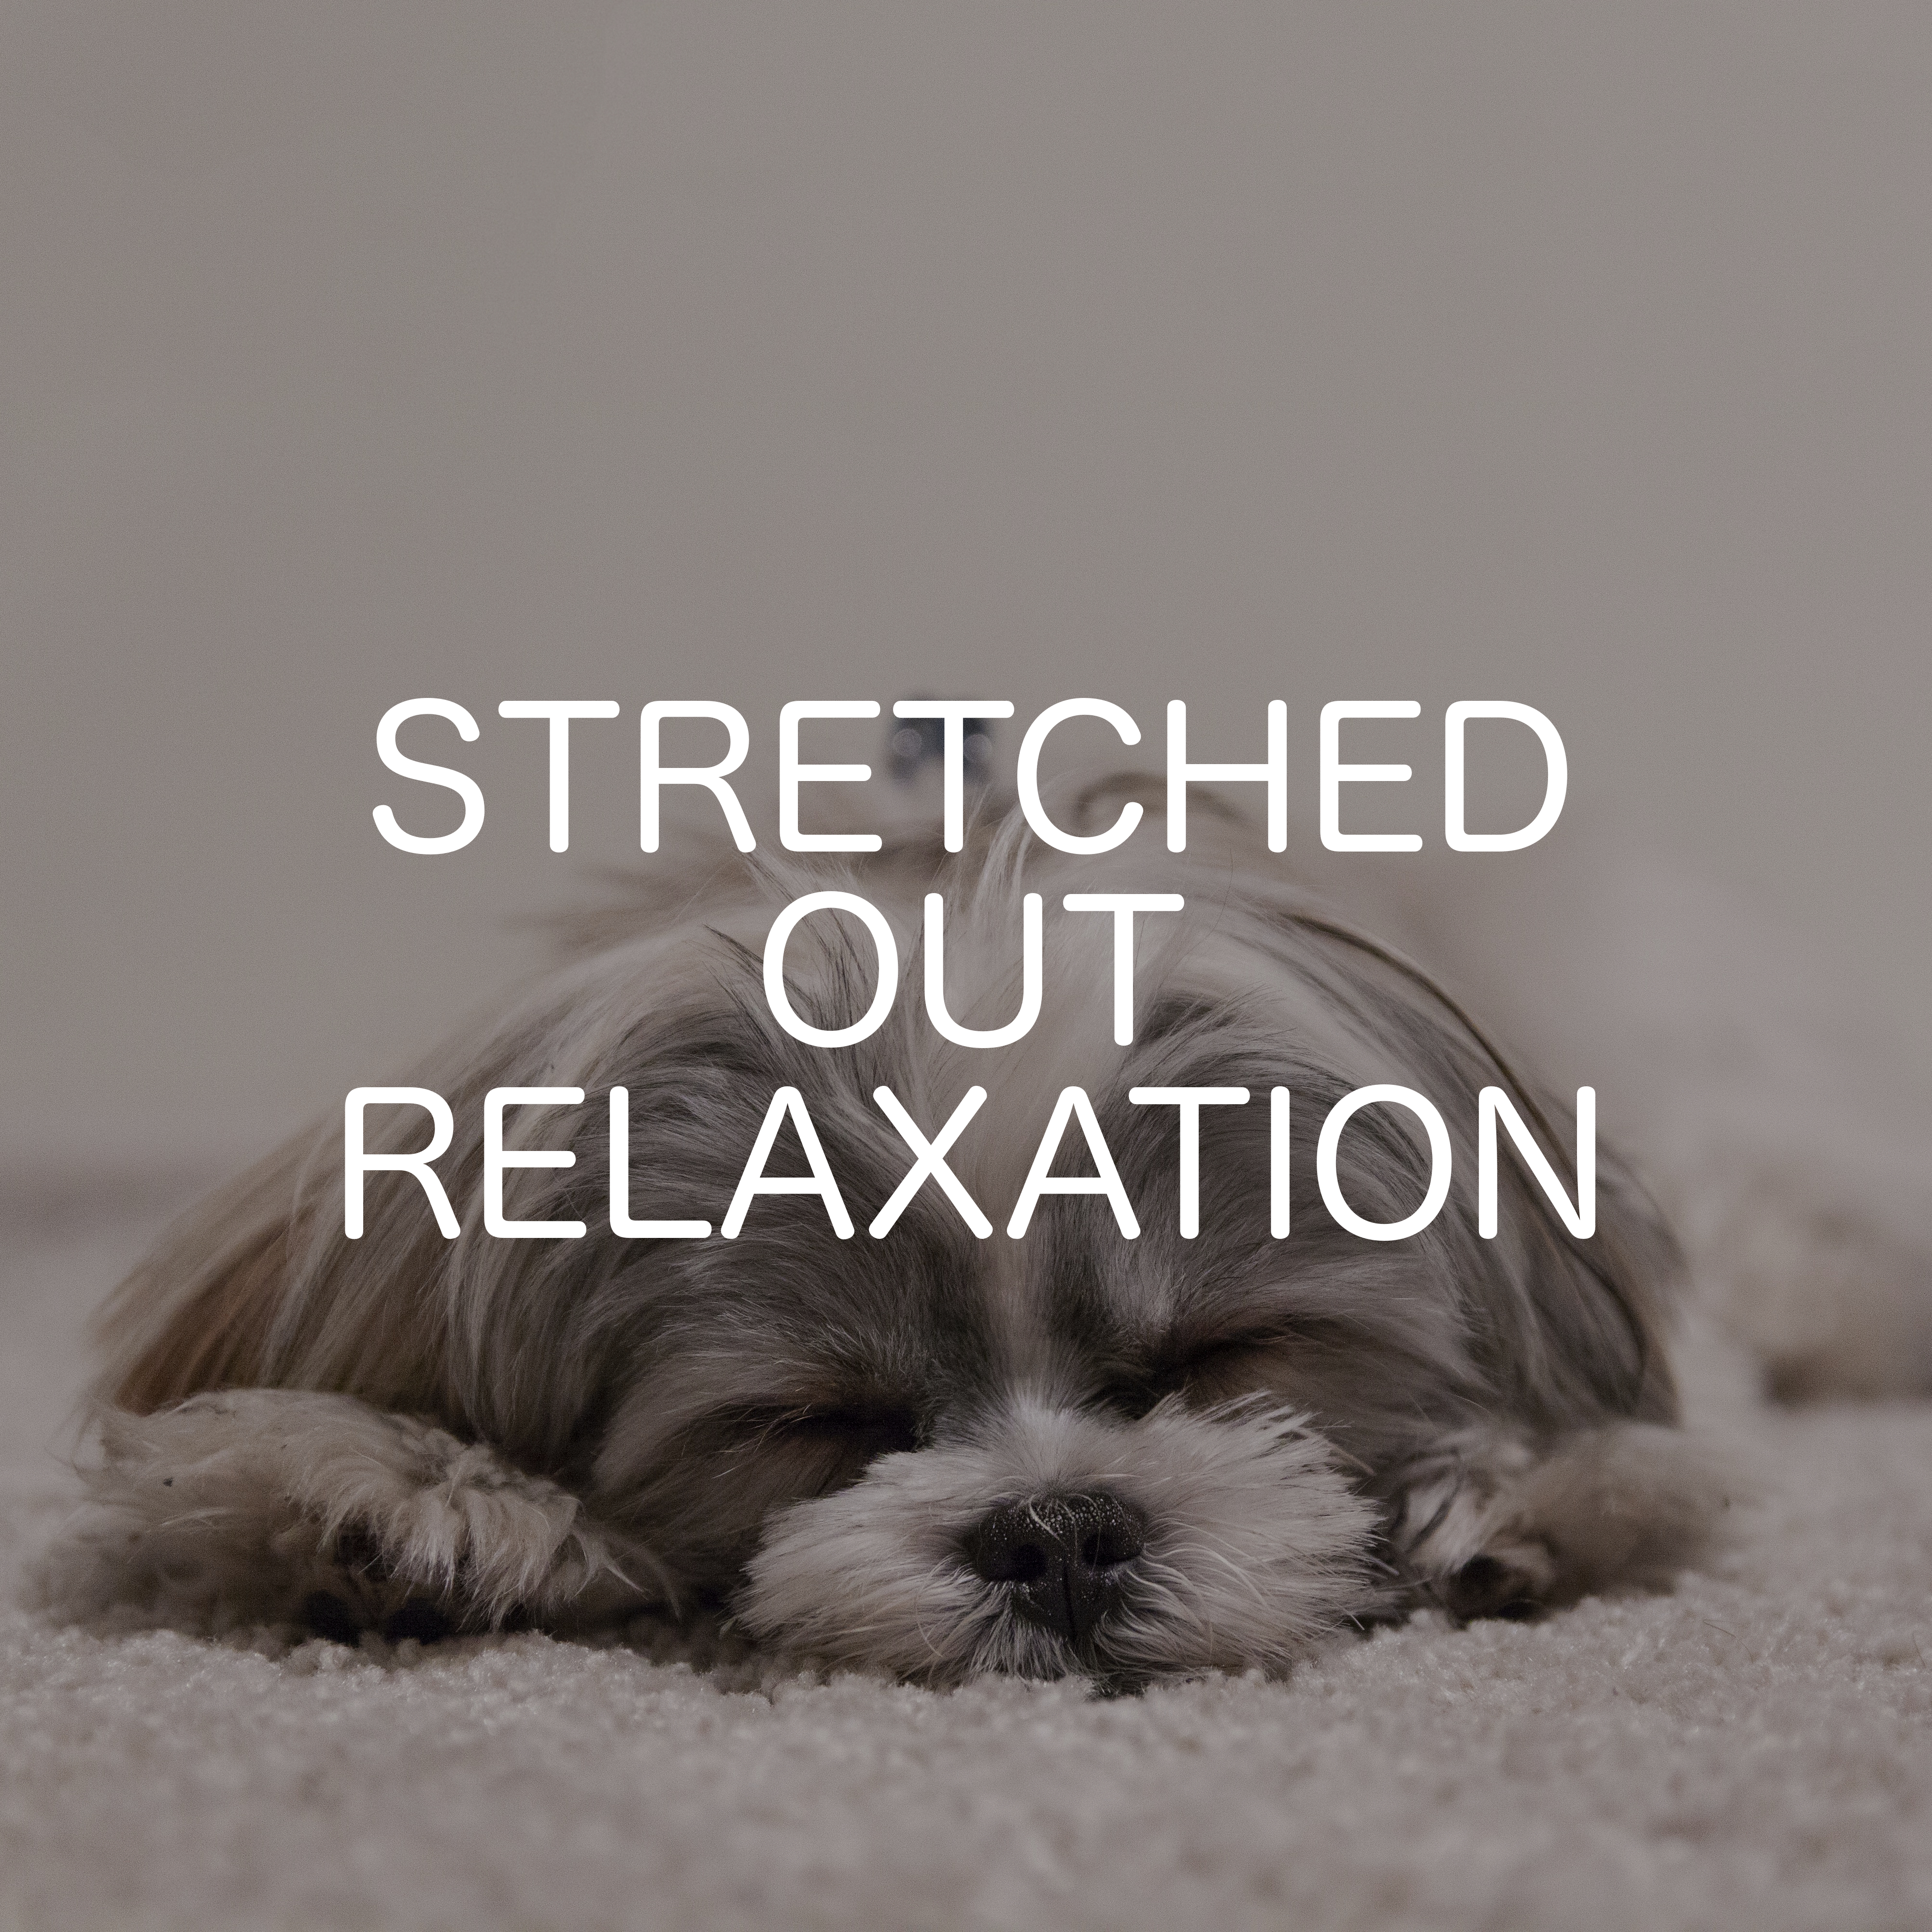 Stretched Out Relaxation